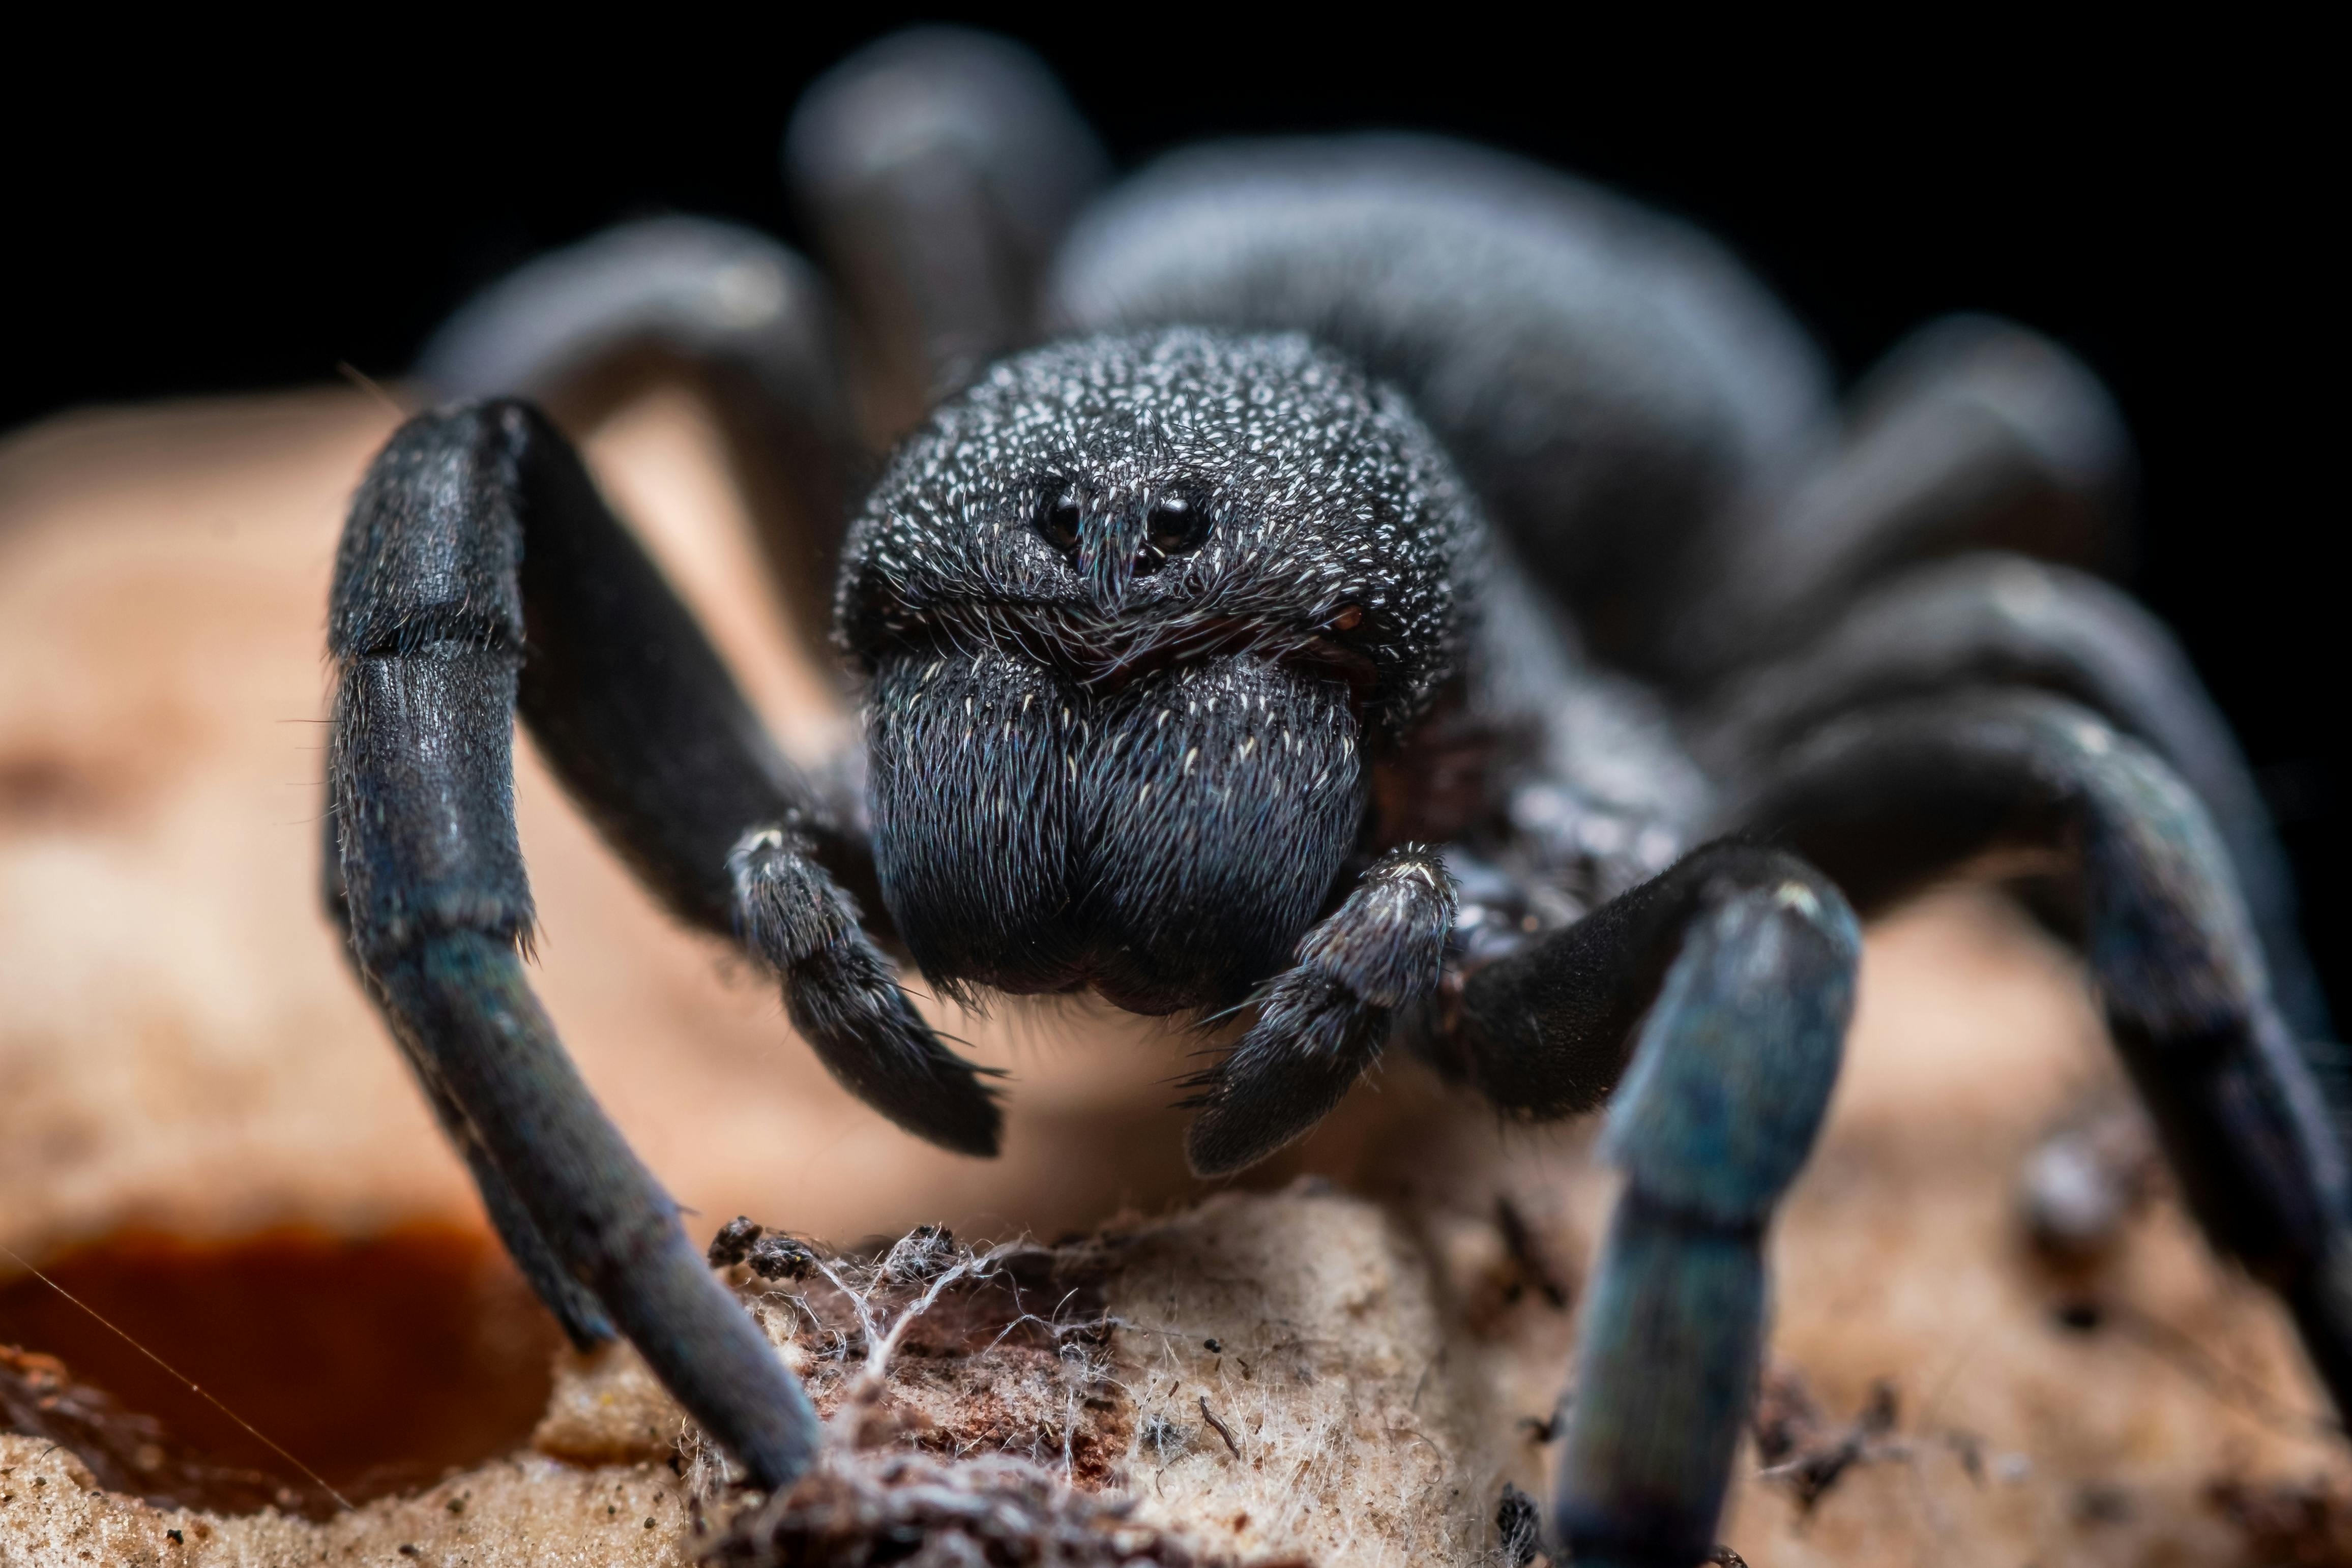 What Is The Significance Of Providing A Hide For Tarantulas?